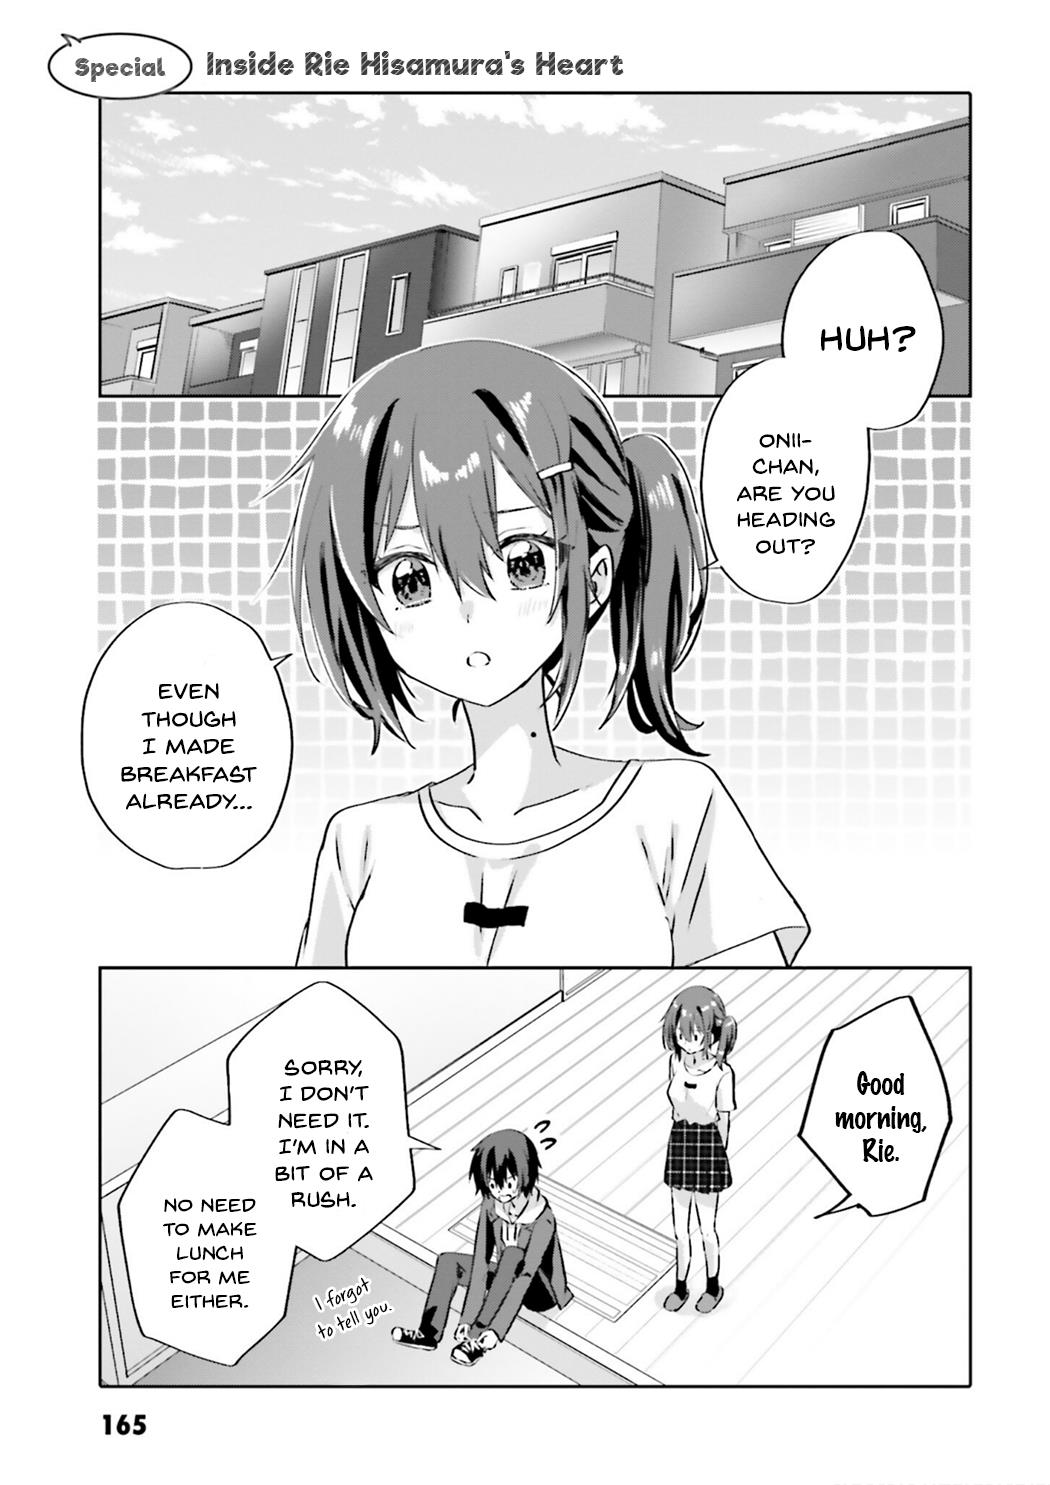 Since I’Ve Entered The World Of Romantic Comedy Manga, I’Ll Do My Best To Make The Losing Heroine Happy Vol.1 Chapter 6.5: Vol.1 Extras - Picture 1